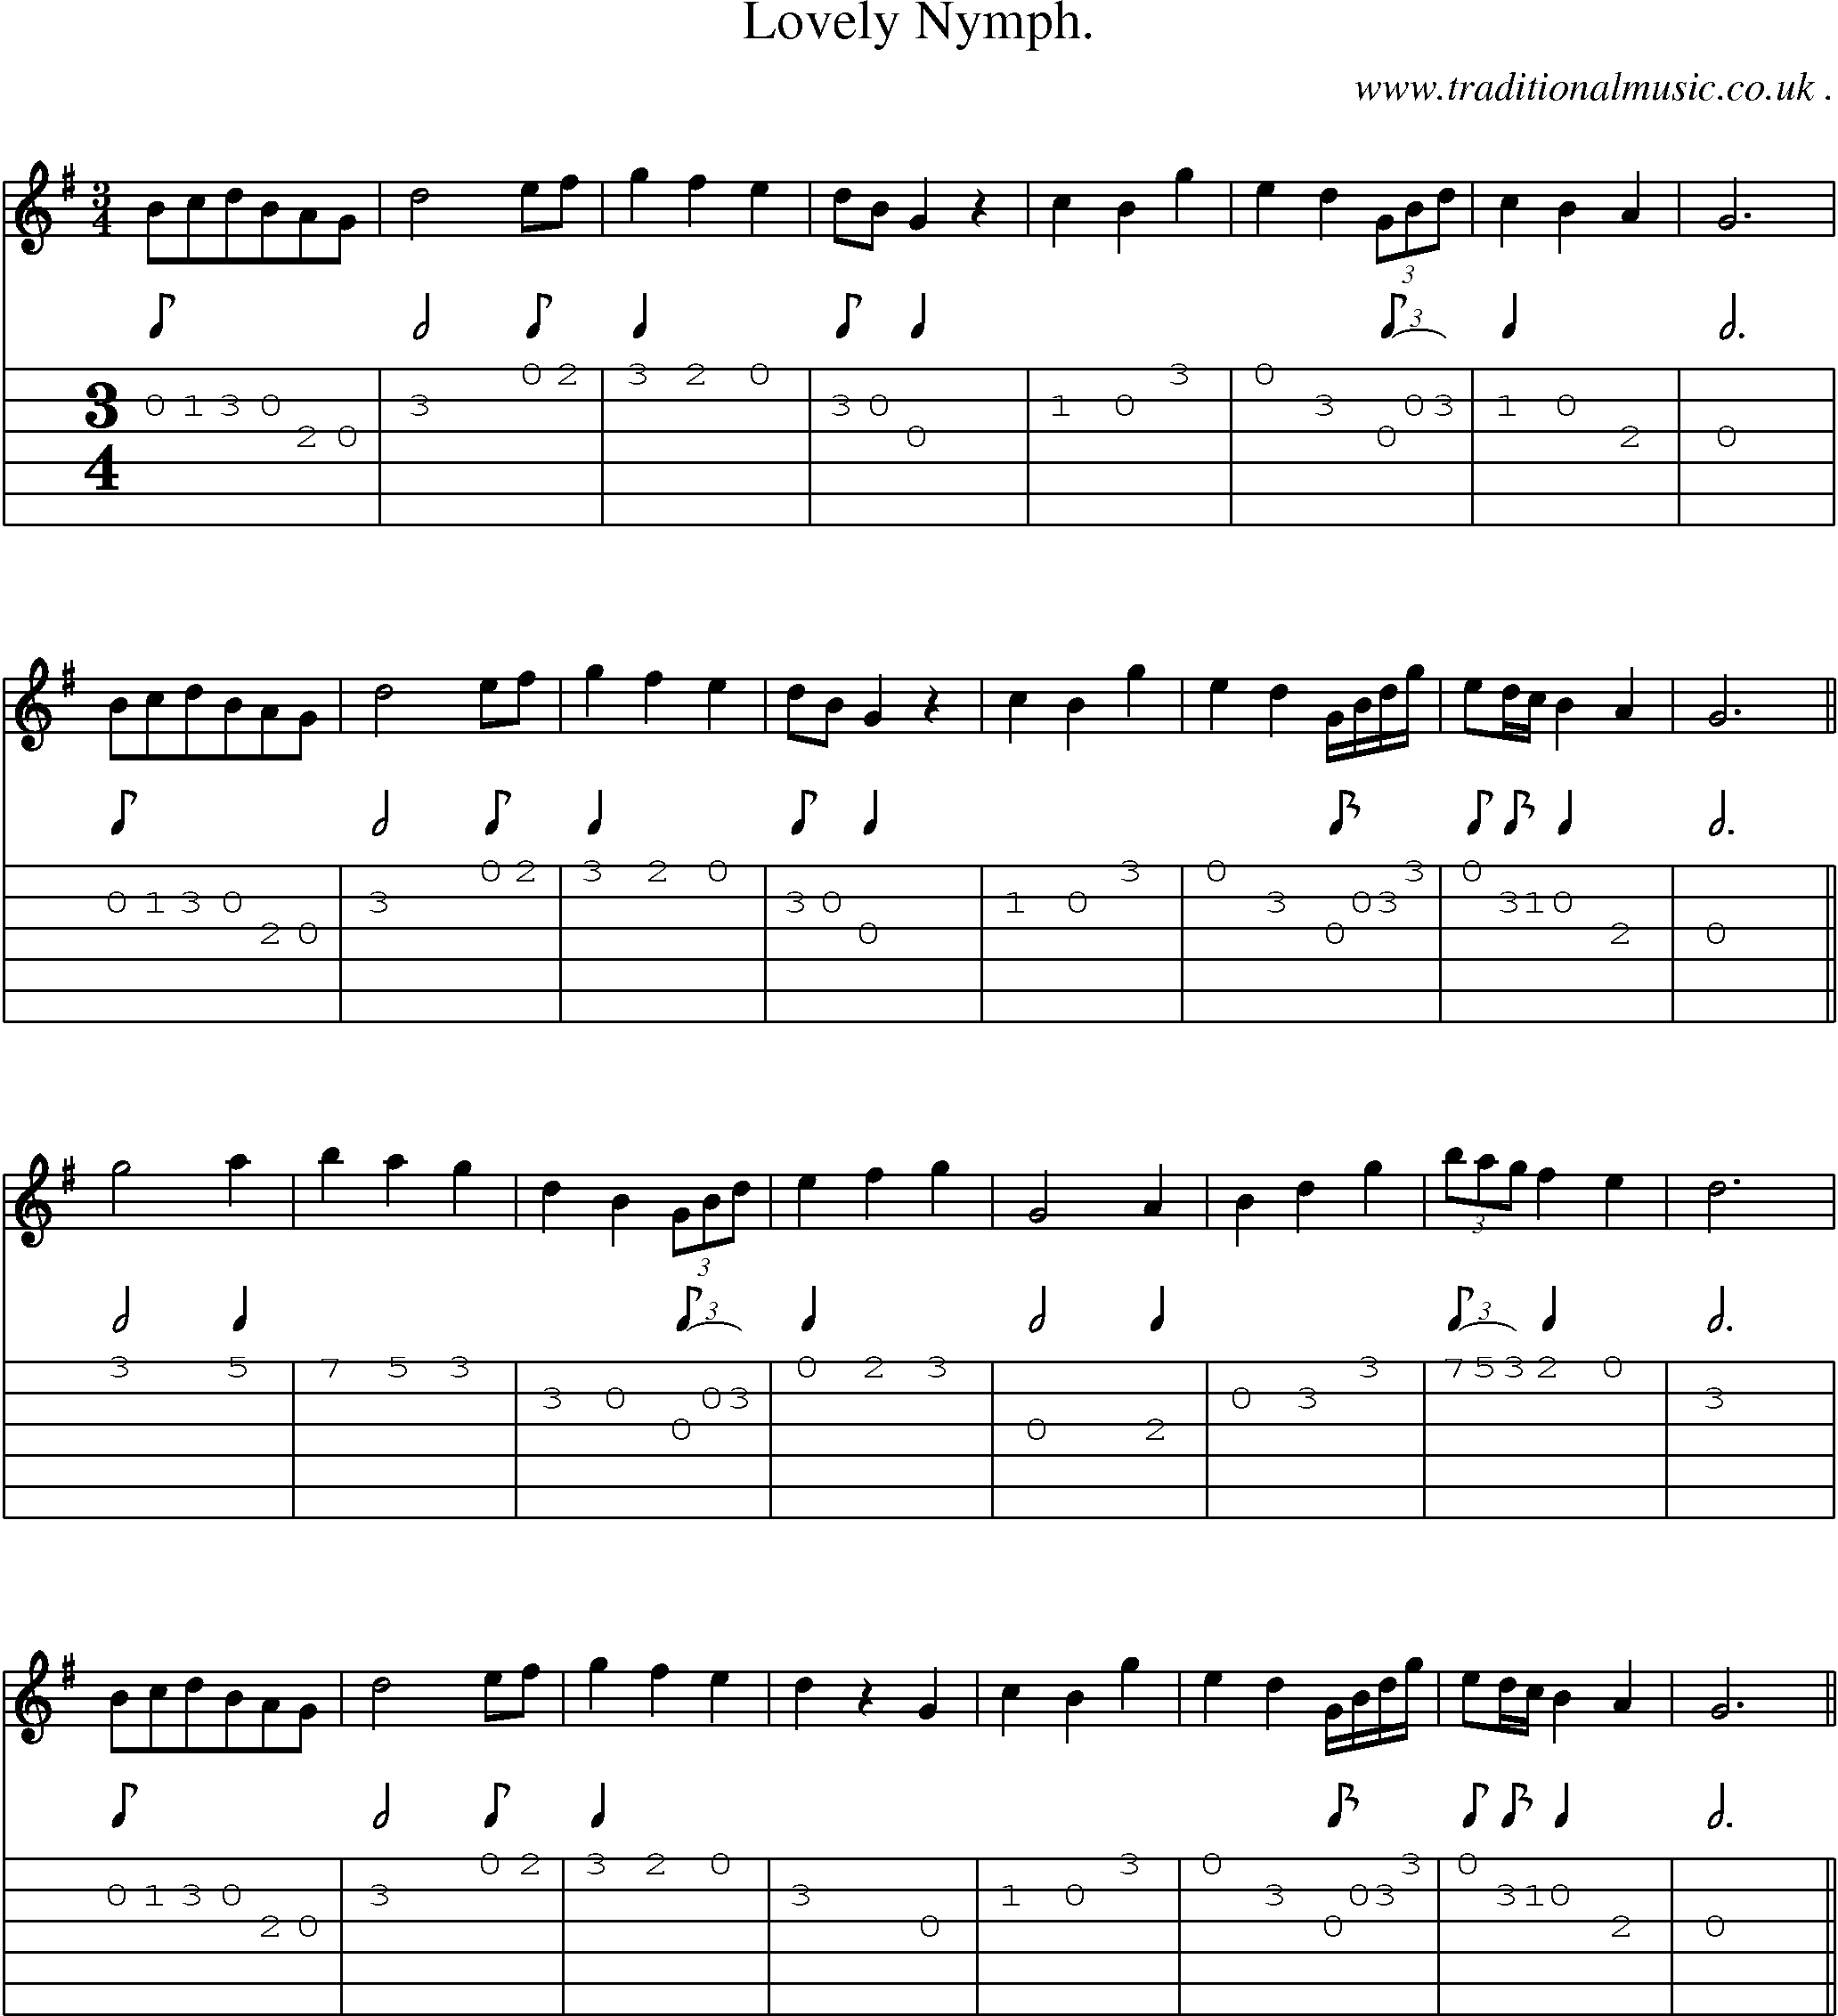 Sheet-Music and Guitar Tabs for Lovely Nymph